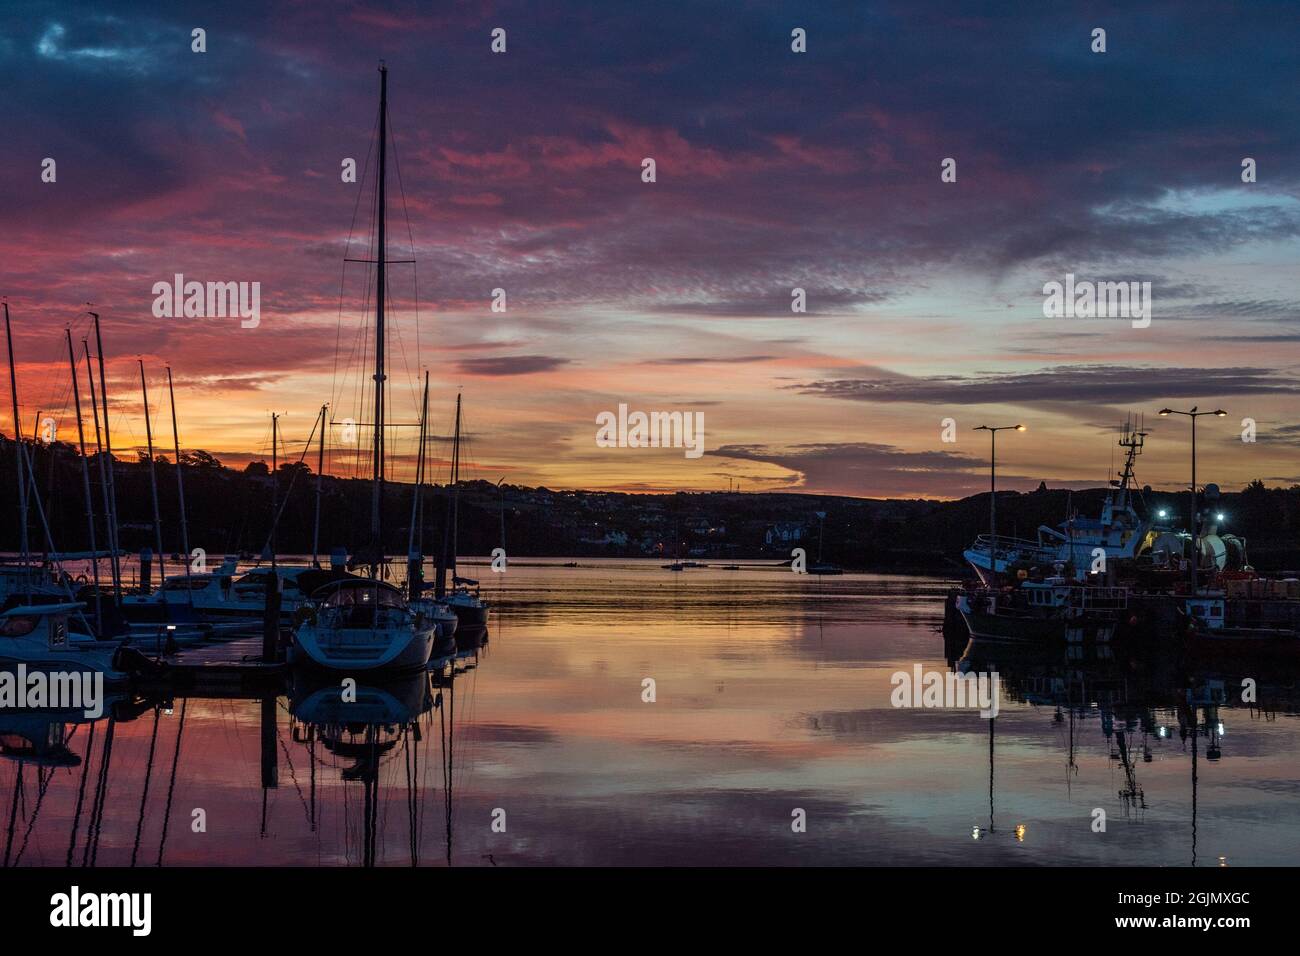 Kinsale, West Cork, Ireland. 11th Sep, 2021. The sun rises over Kinsale on the 20th anniversary of the 9/11 terrorist attacks in America. During the attacks, 2,977 people were killed in the deadliest terrorist attacks in world history. Credit: AG News/Alamy Live News Stock Photo